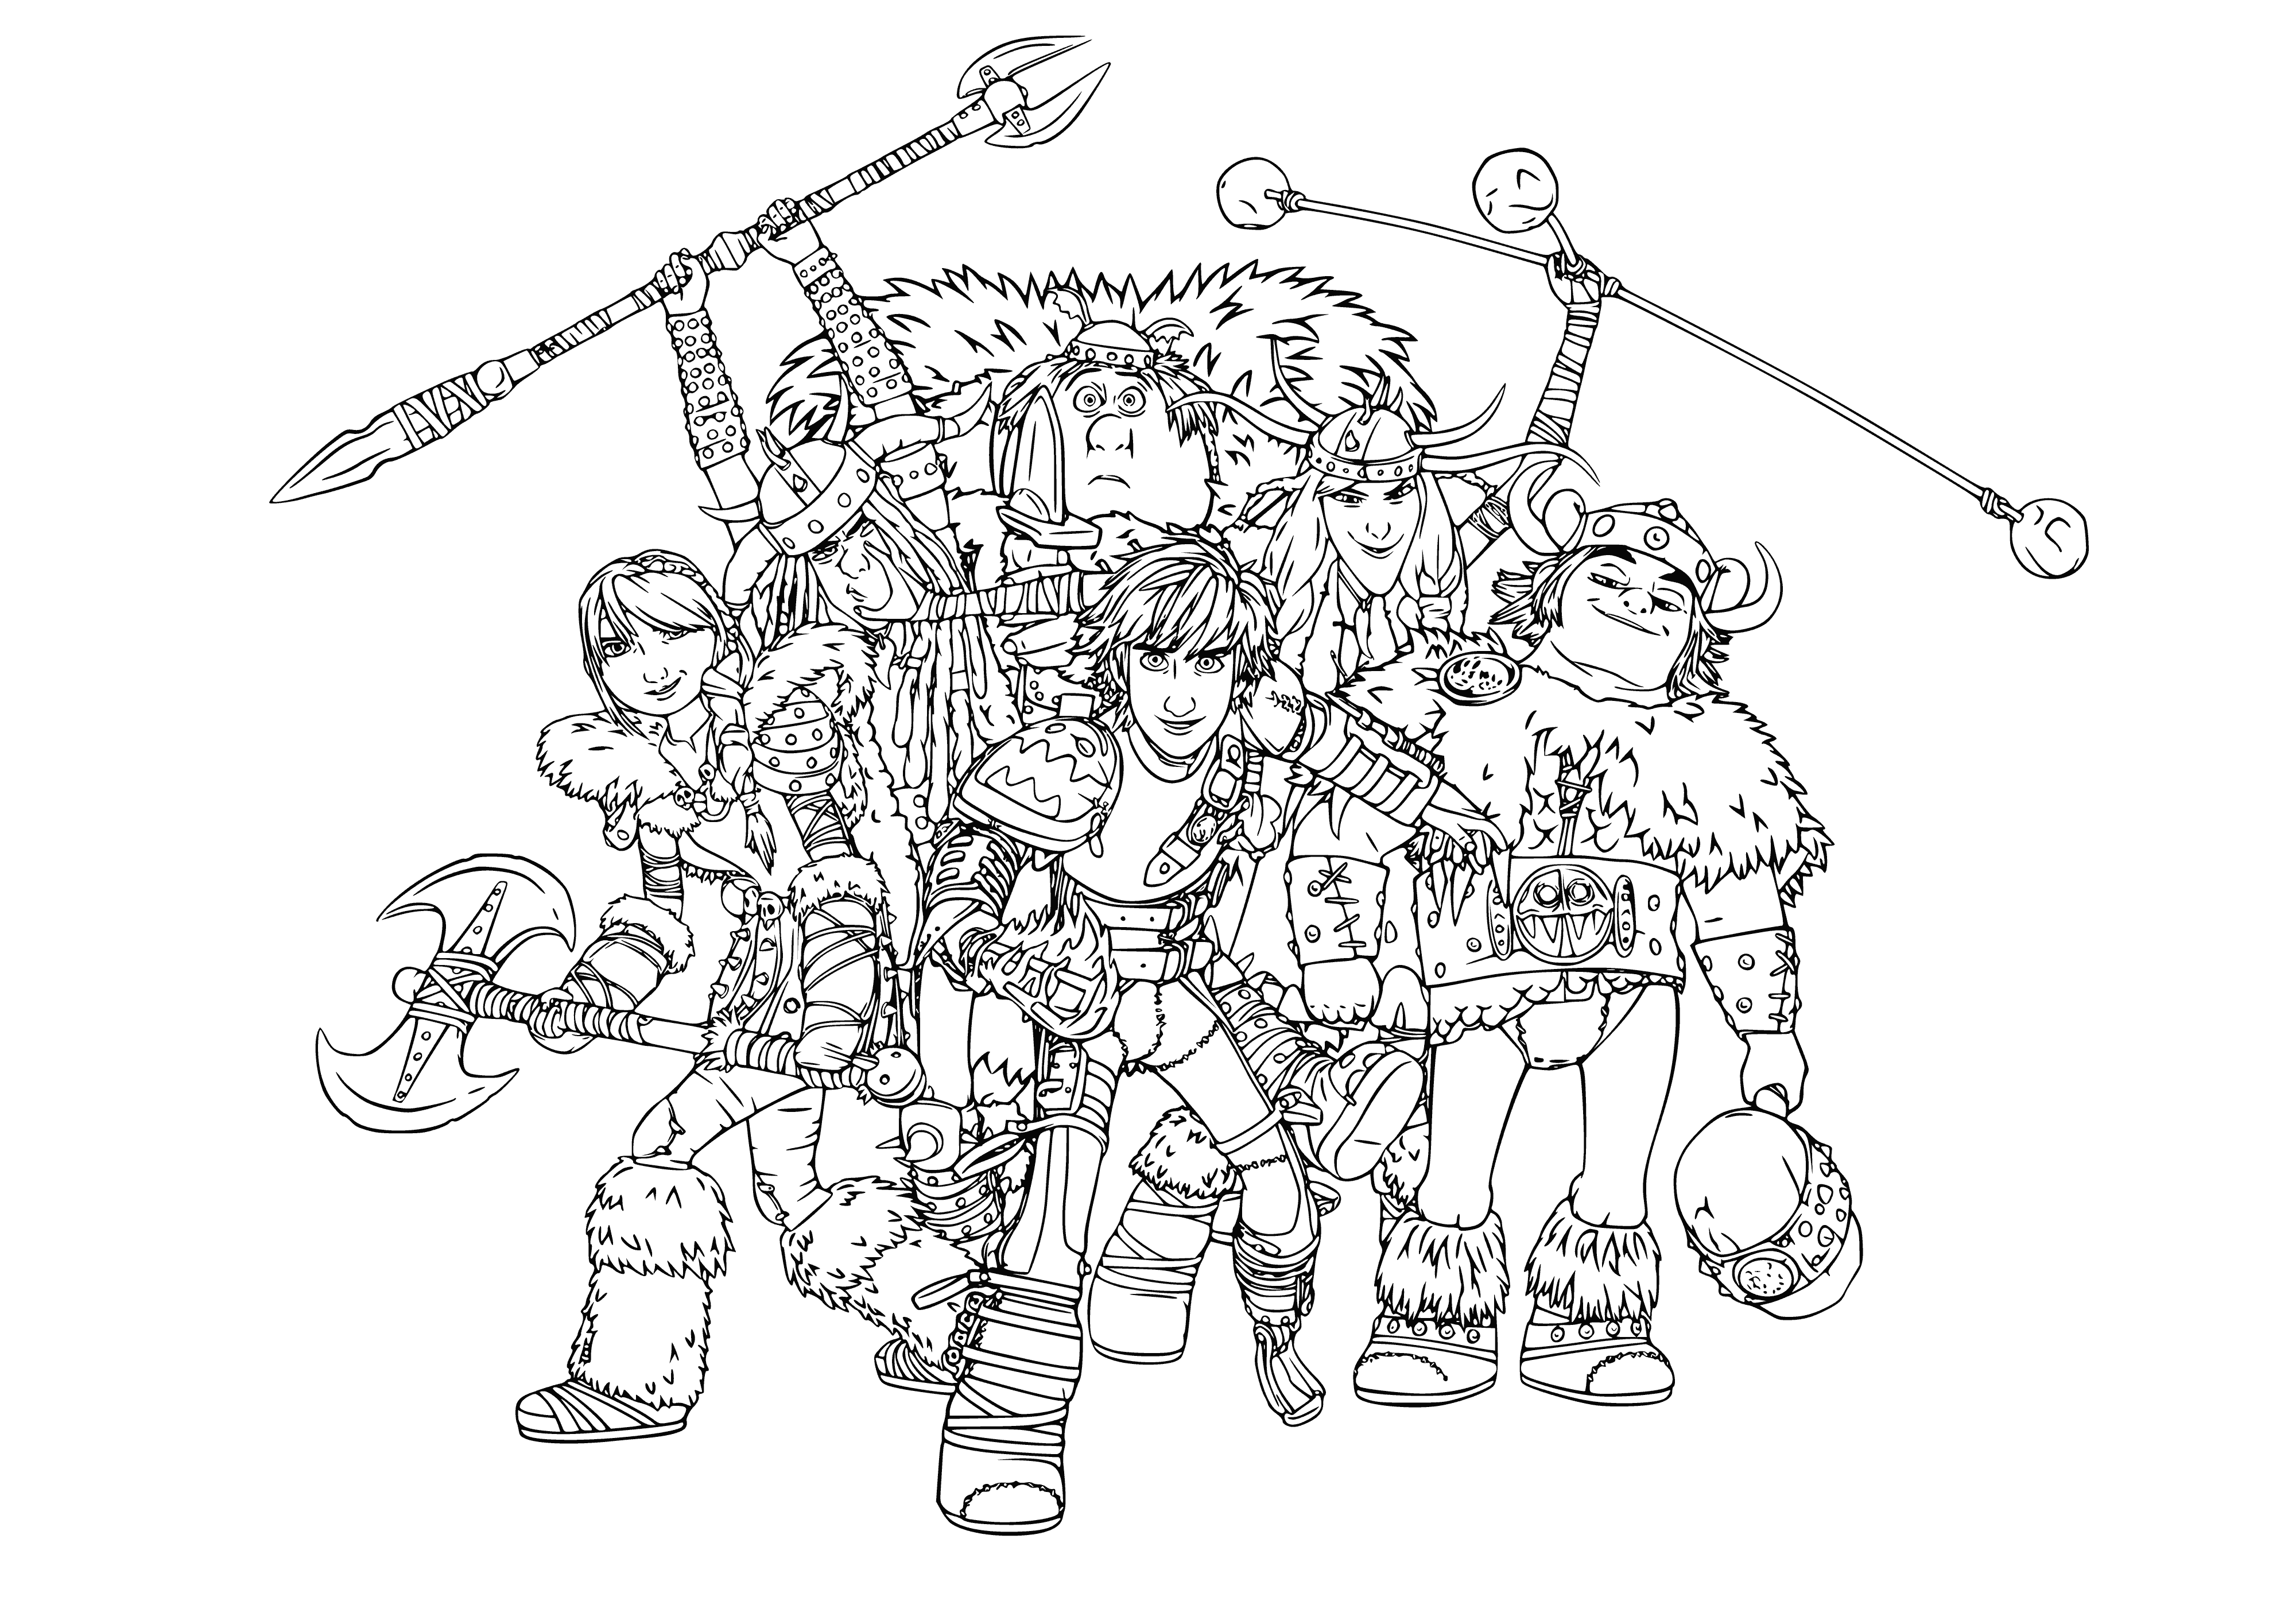 Hiccup and his friends coloring page